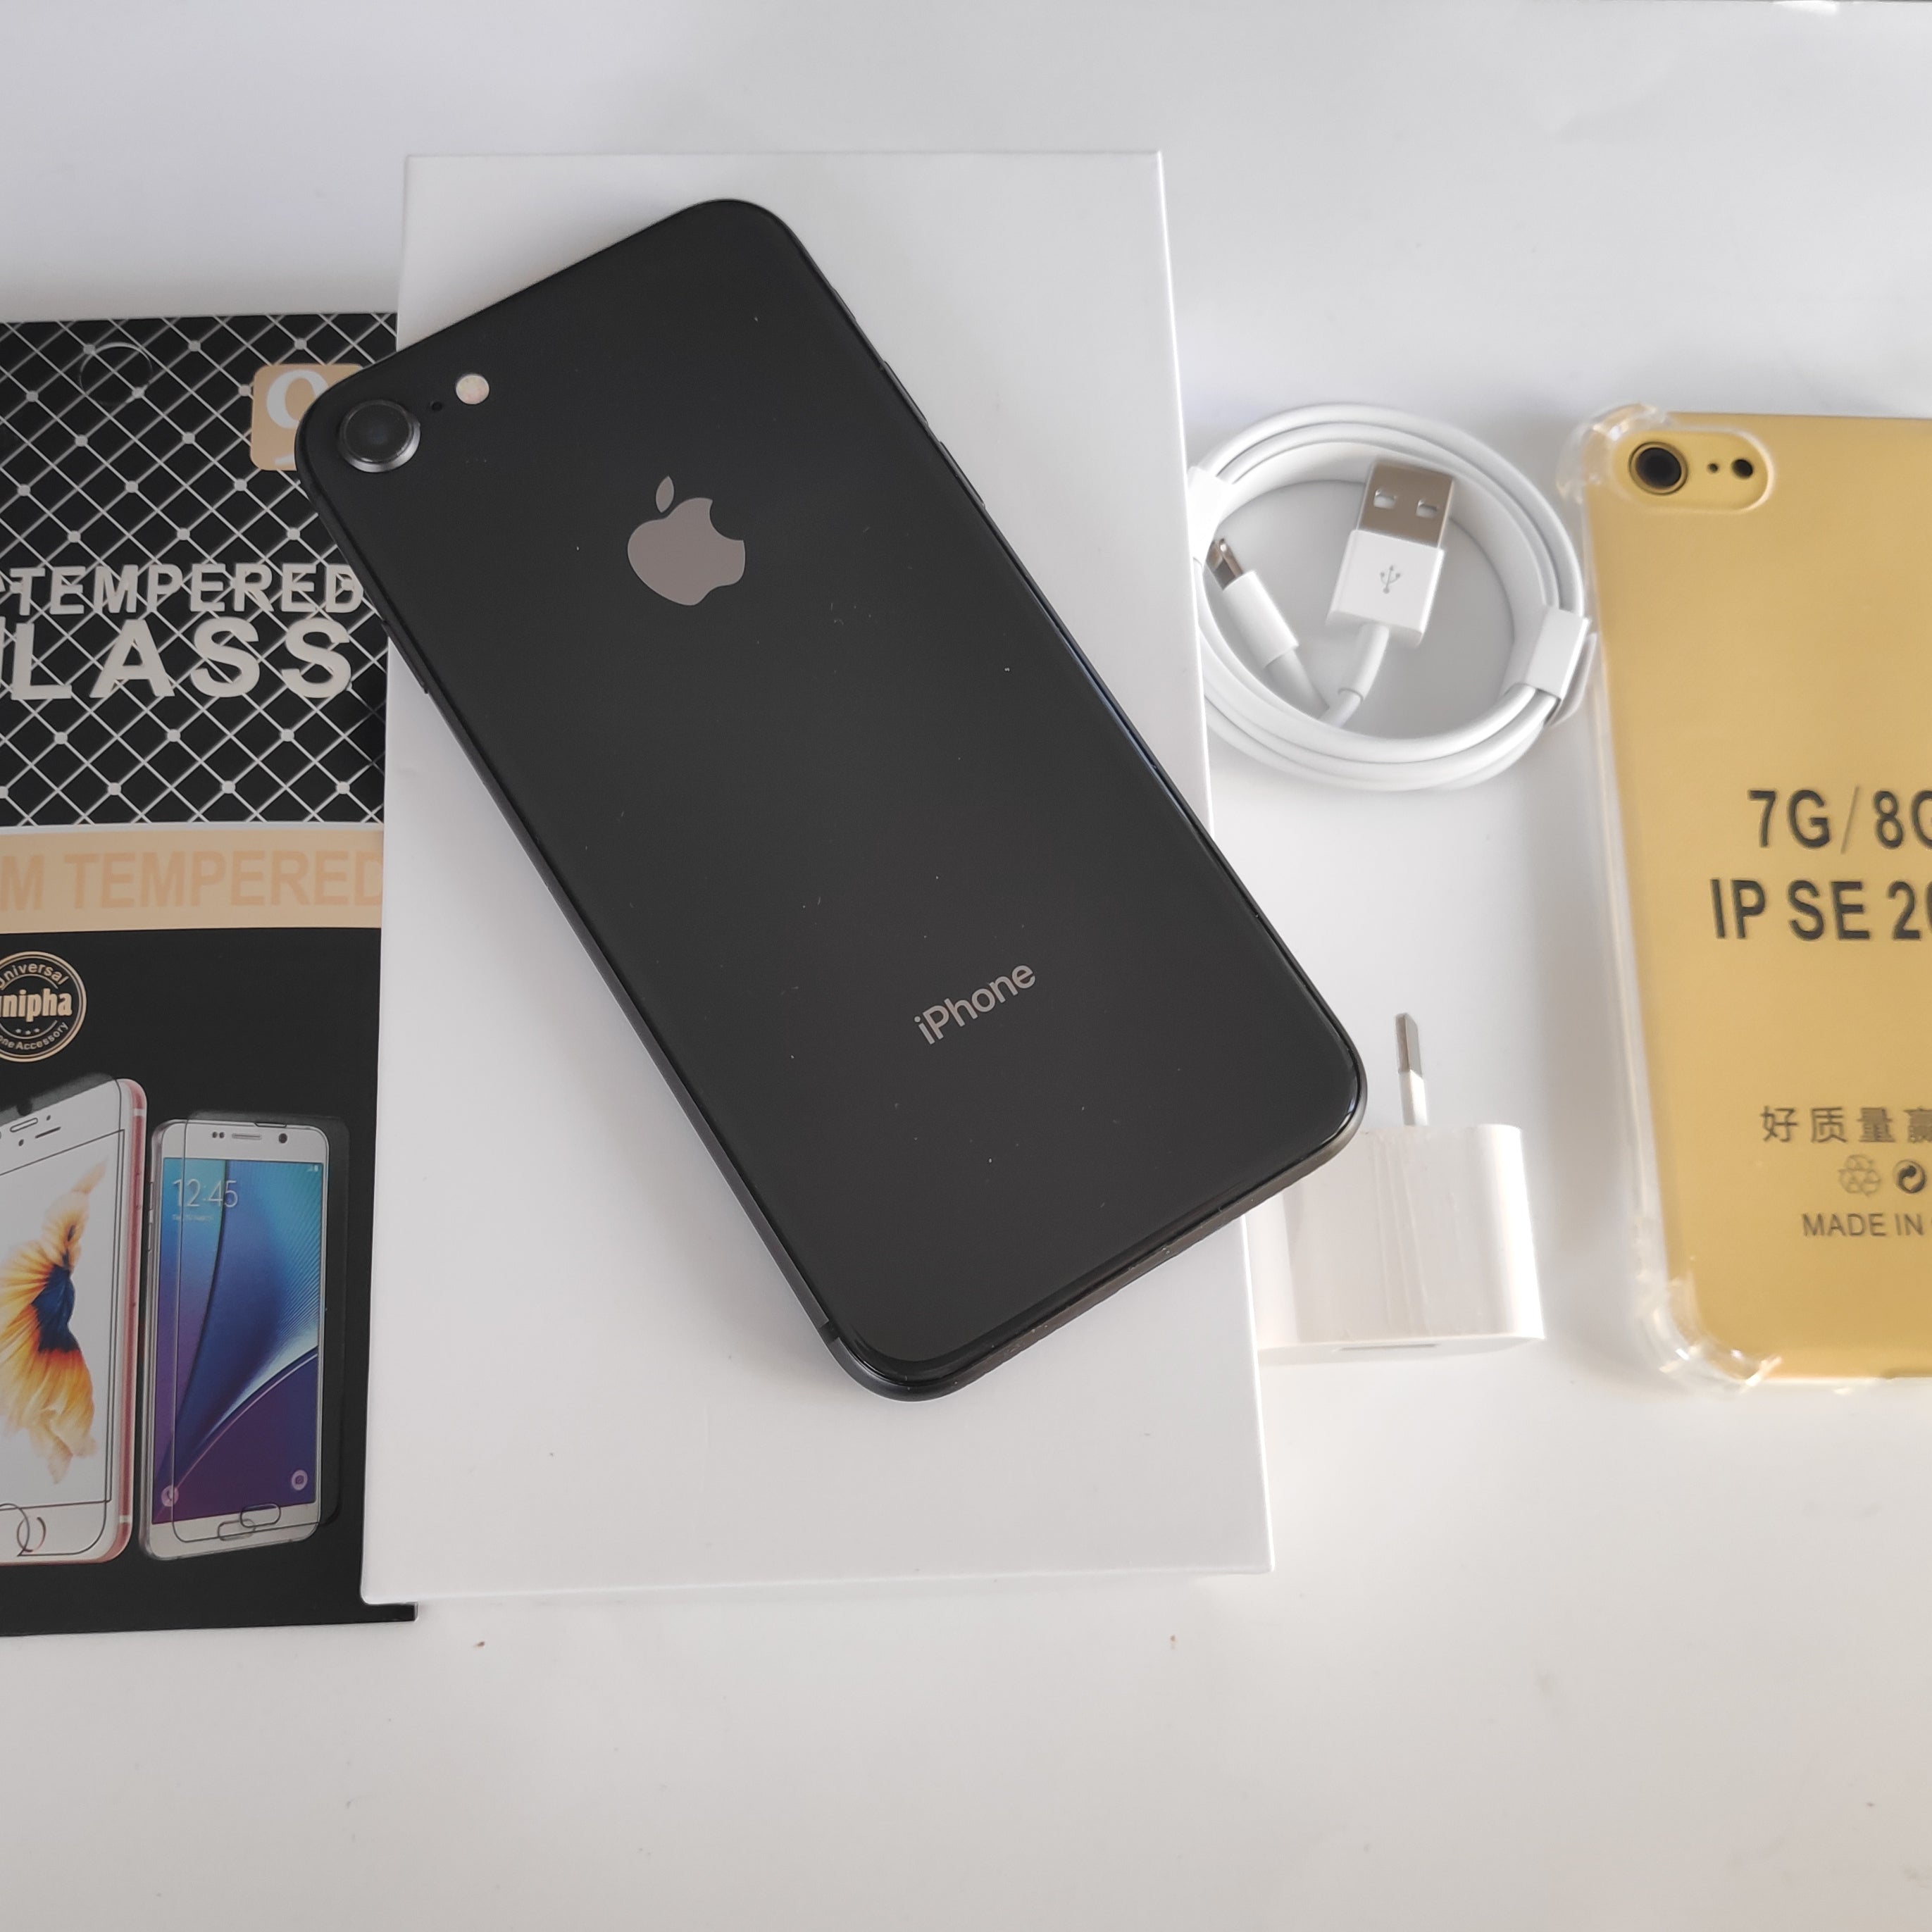 iphone laybuy nz,iphone 8 second hand price,cheap refurbished iphone 8